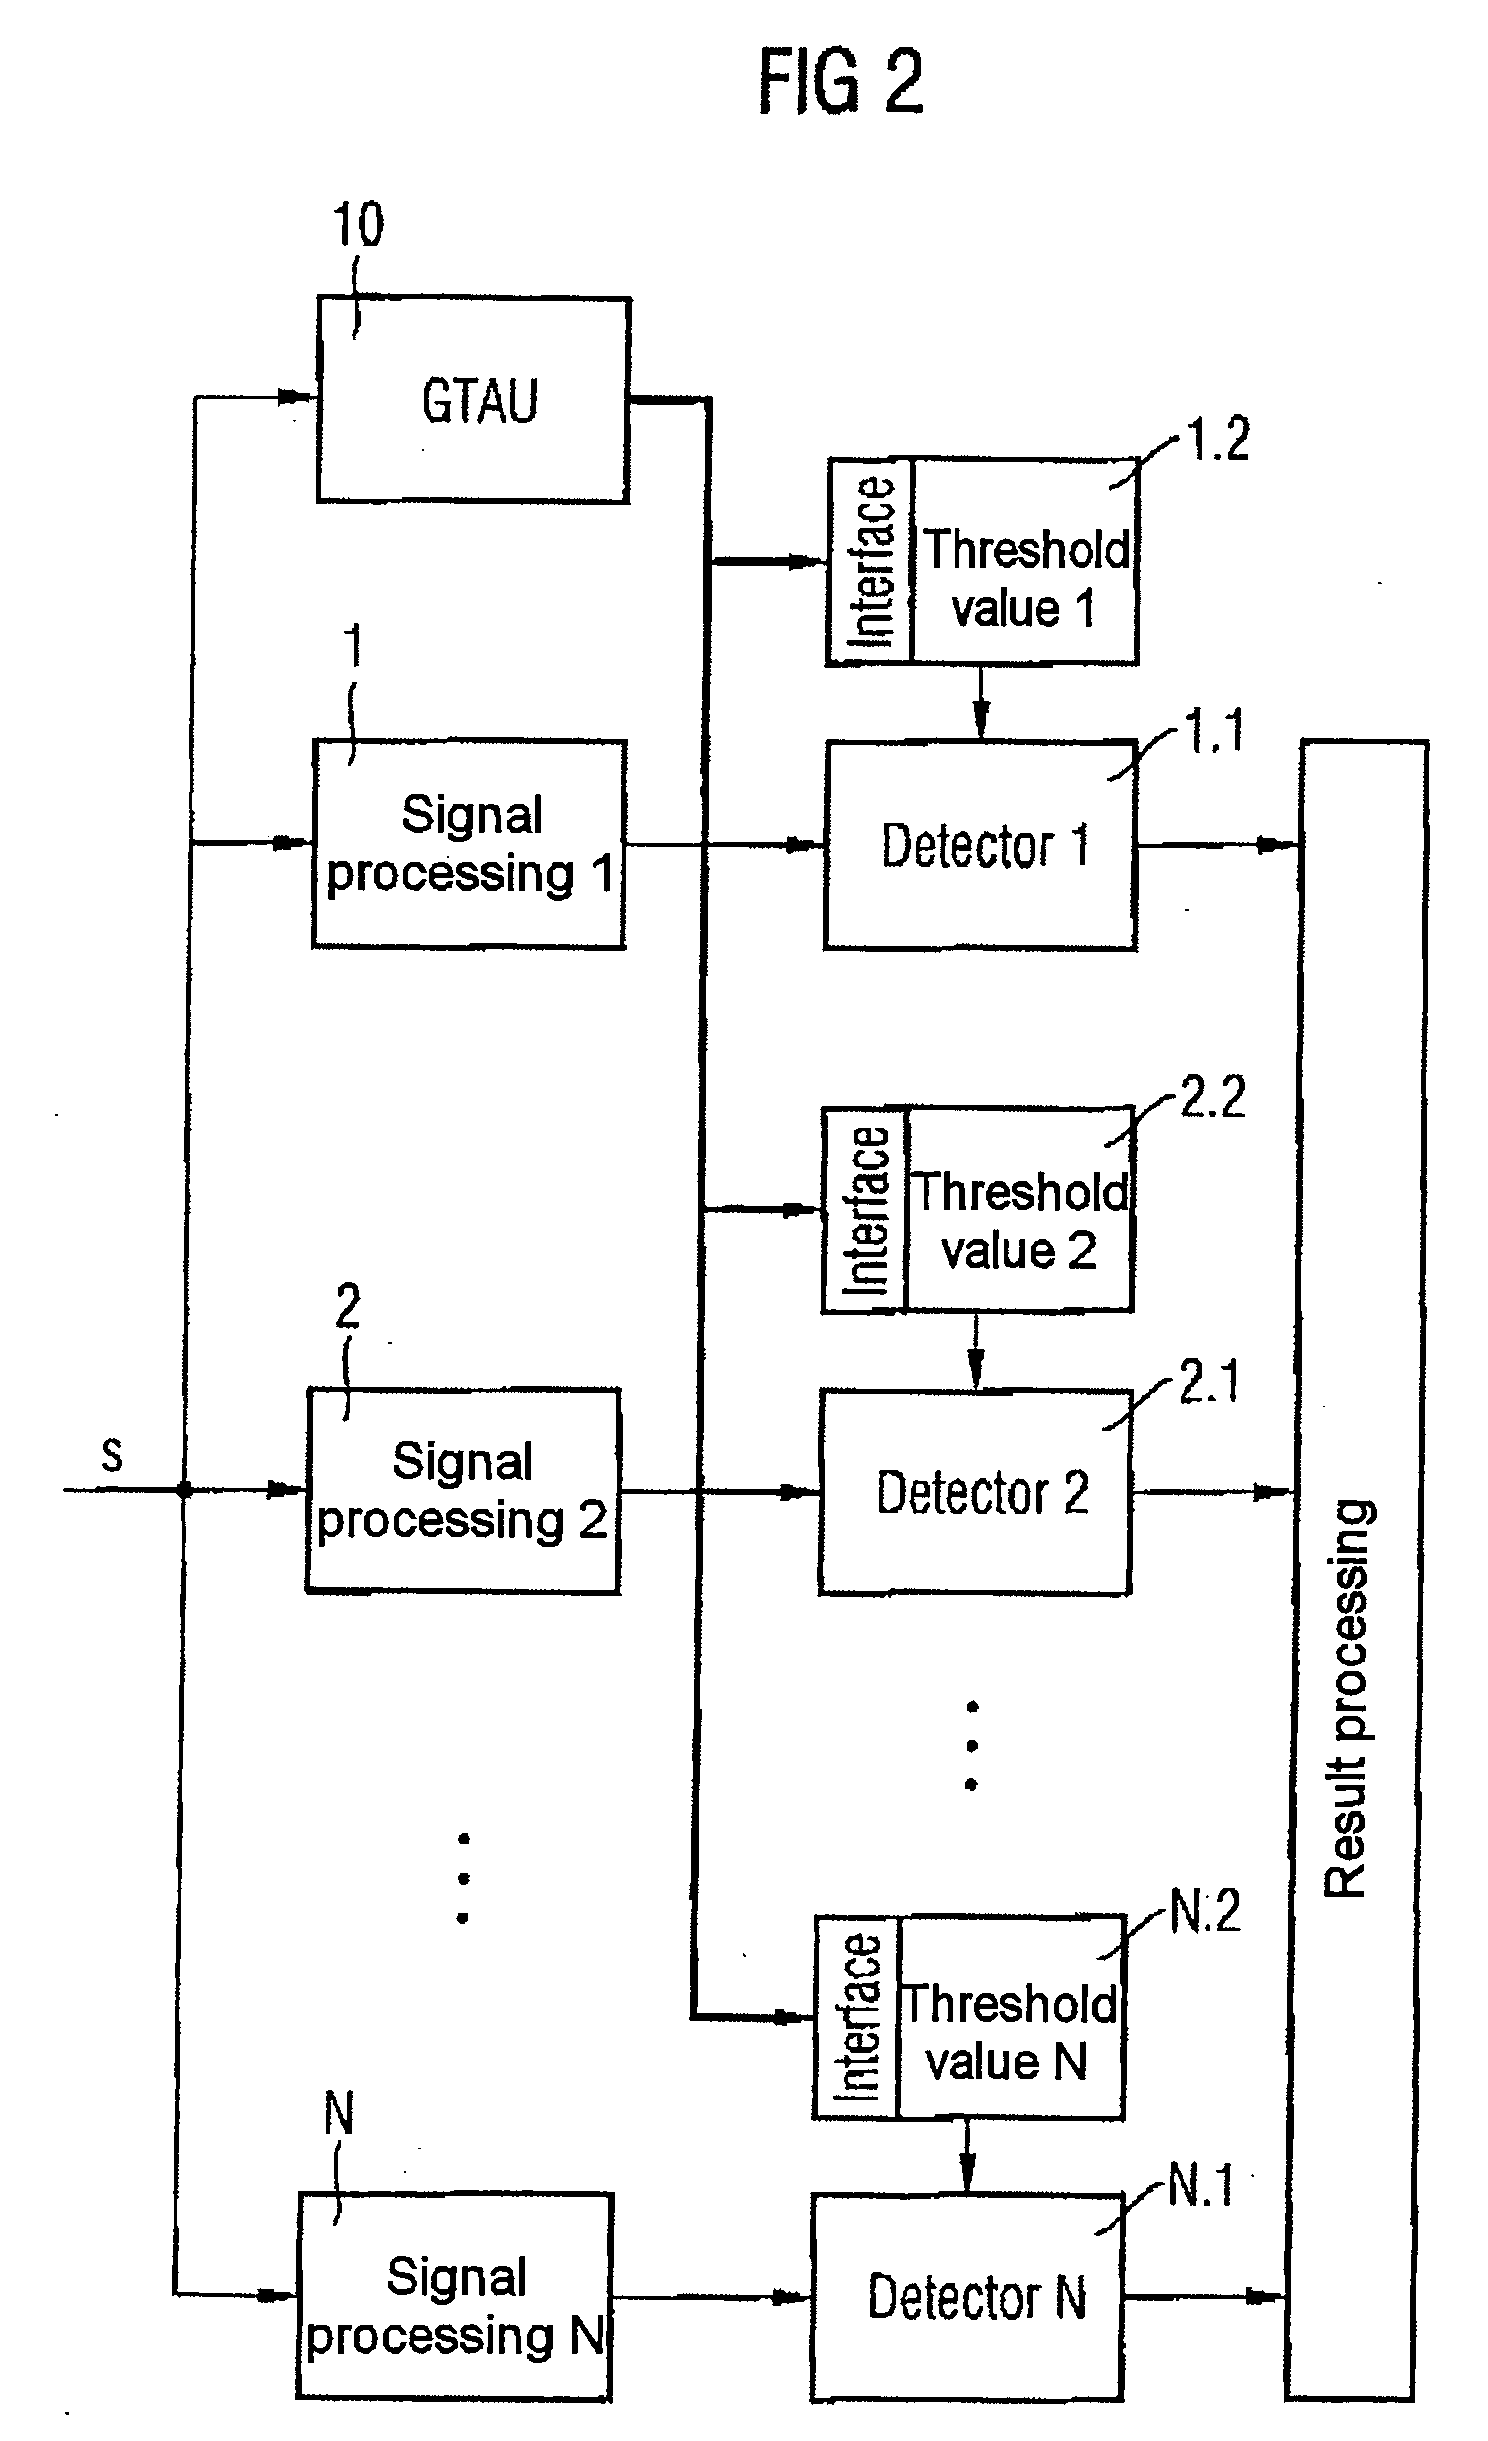 Method and apparatus for adapting threshold values in electronic signal processing devices